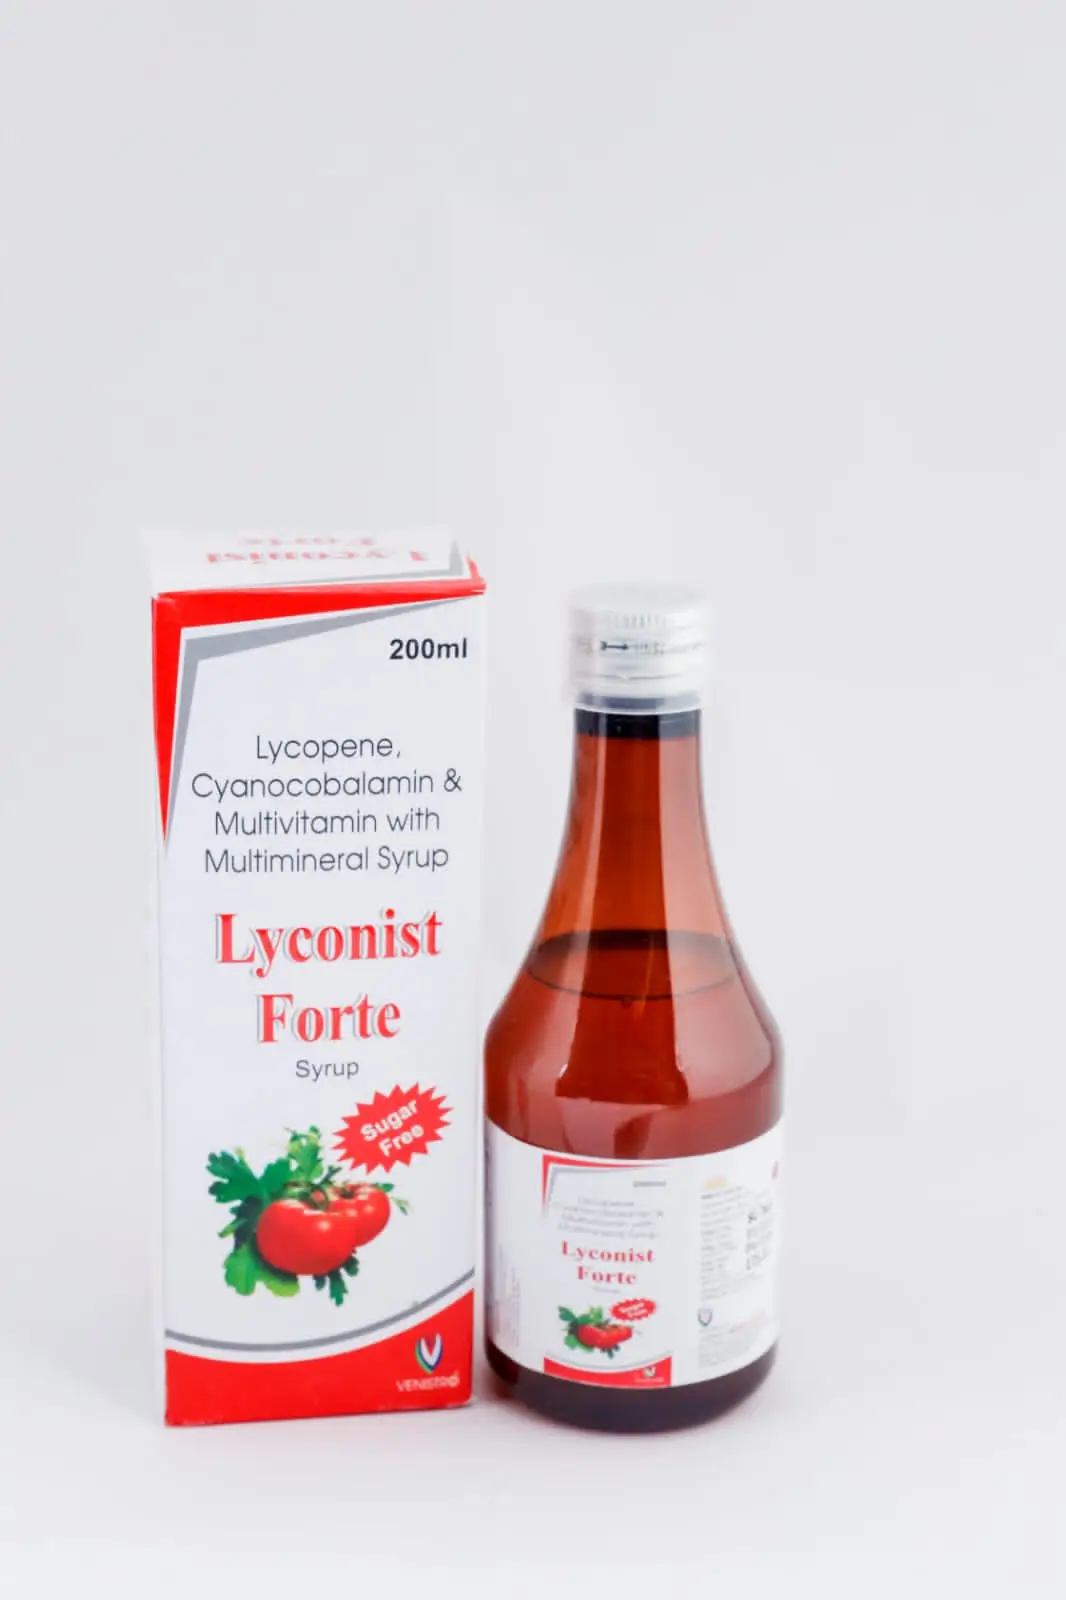 LYCONIST FORTE